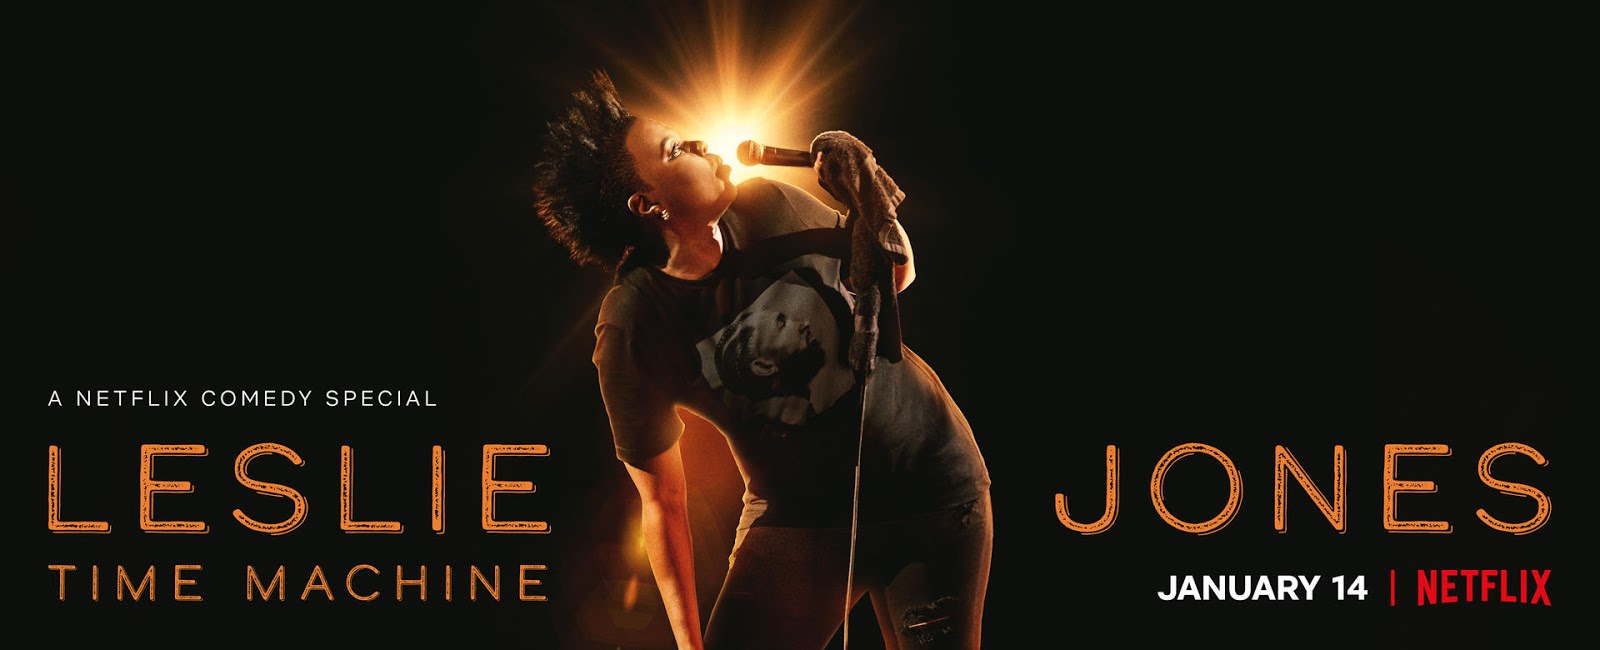 NETFLIX RELEASES OFFICIAL TRAILER AND KEY ART FOR LESLIE JONES: TIME MACHINE